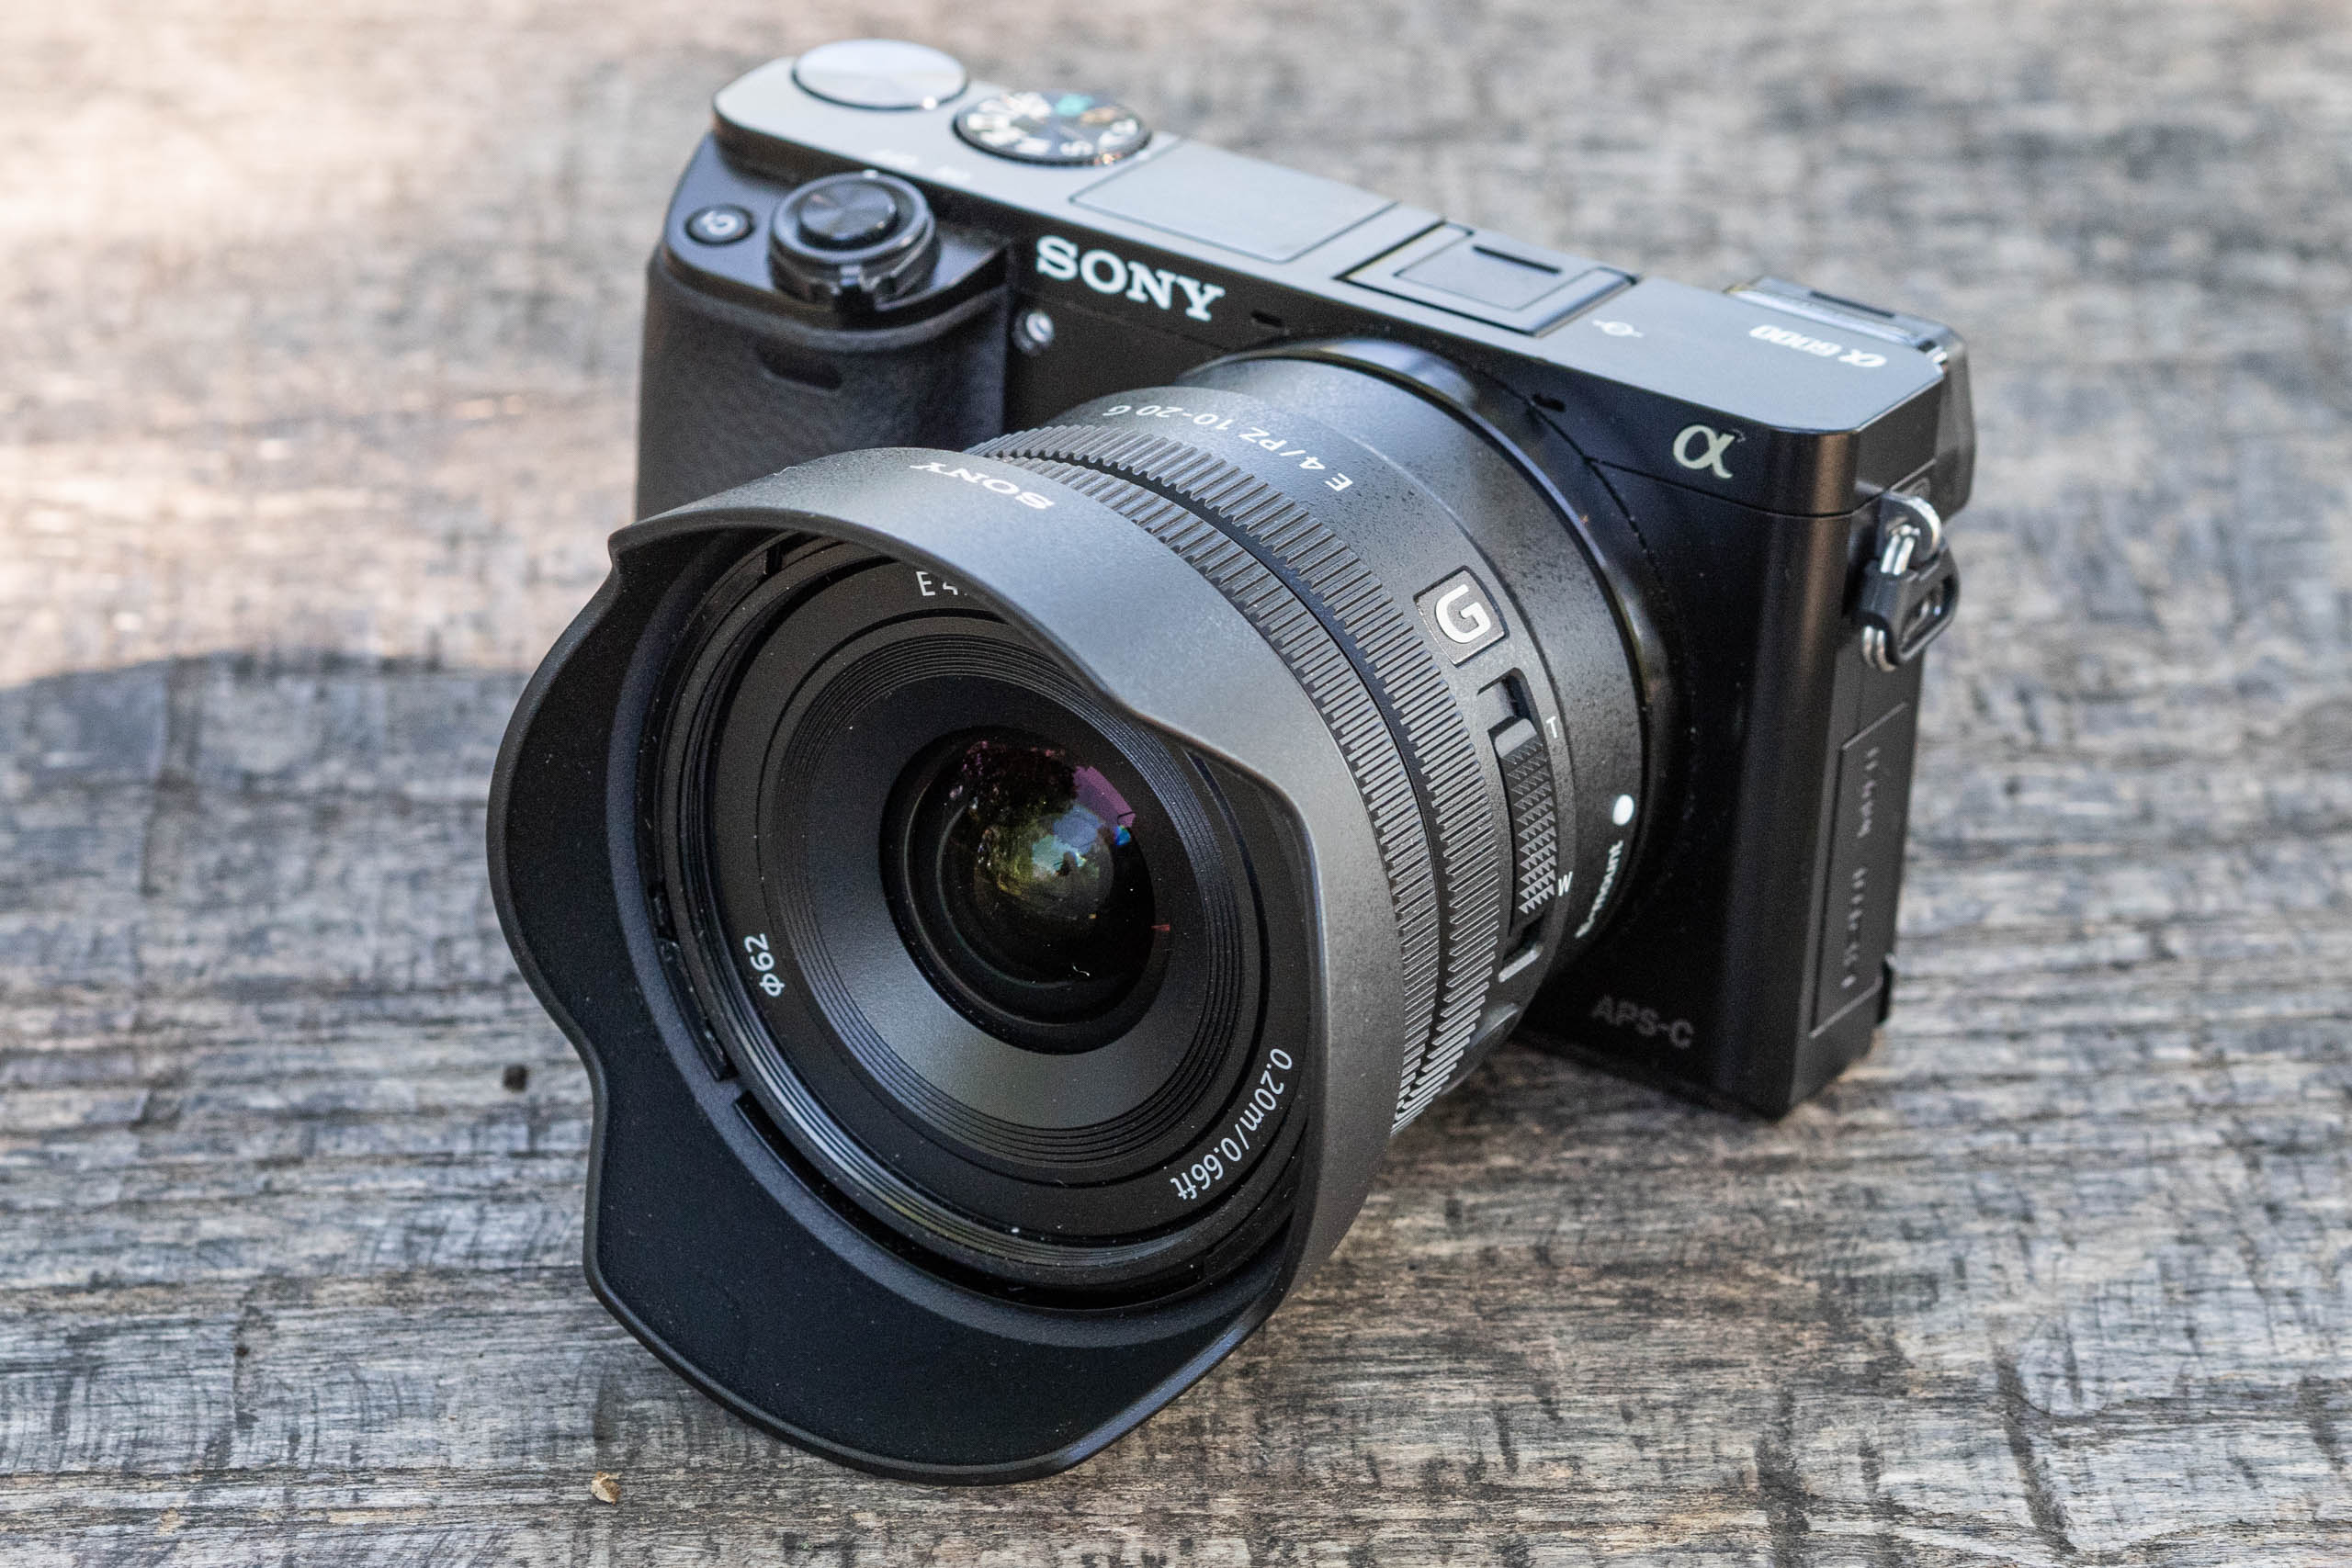 Sony E PZ 10-20mm F4 G with hood on Sony A6000